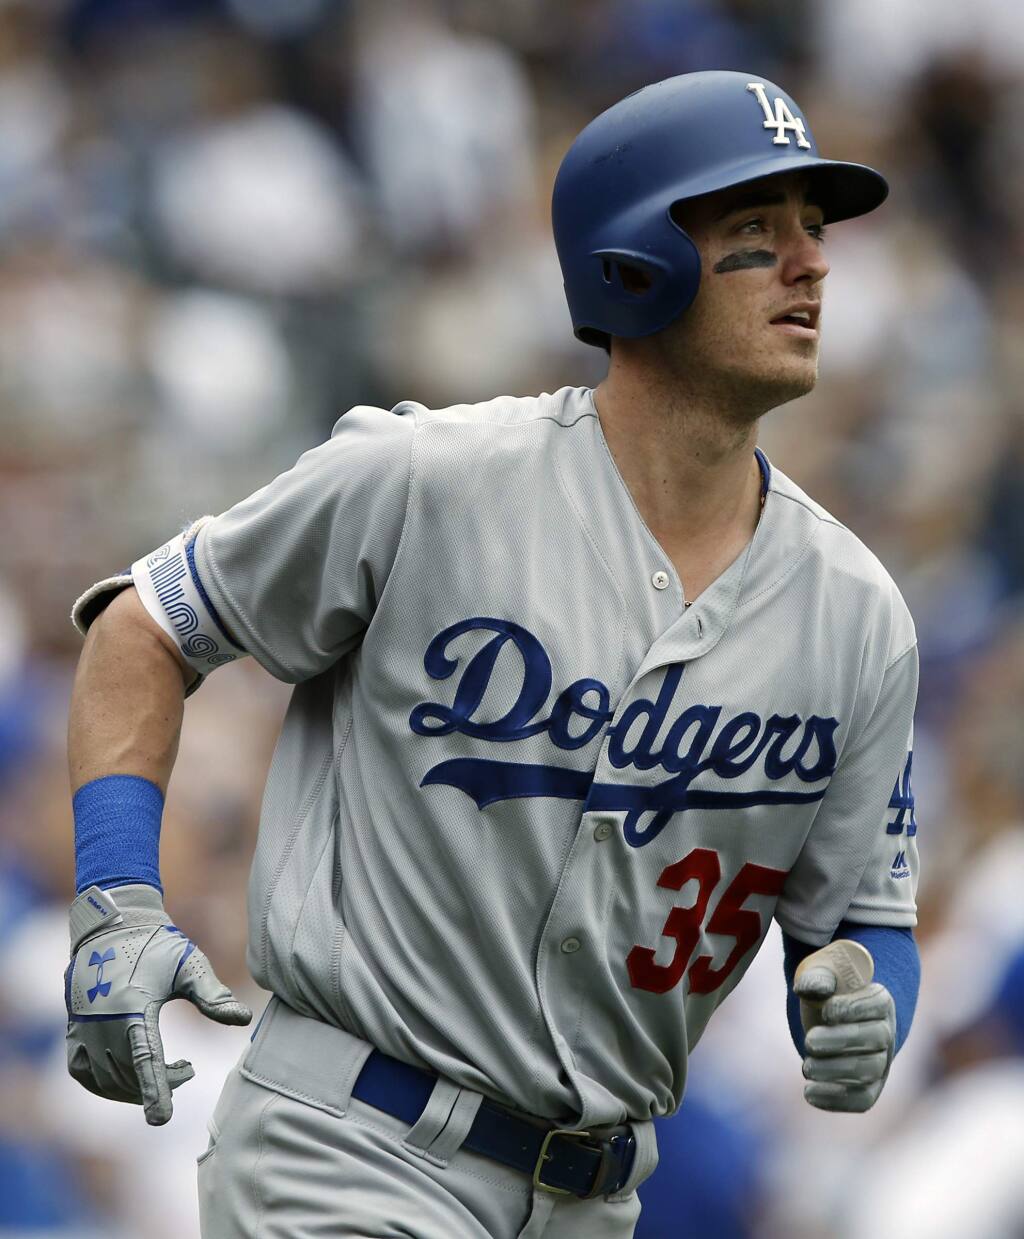 Cody Bellinger gives Yankees a taste of what he could do for them - Newsday